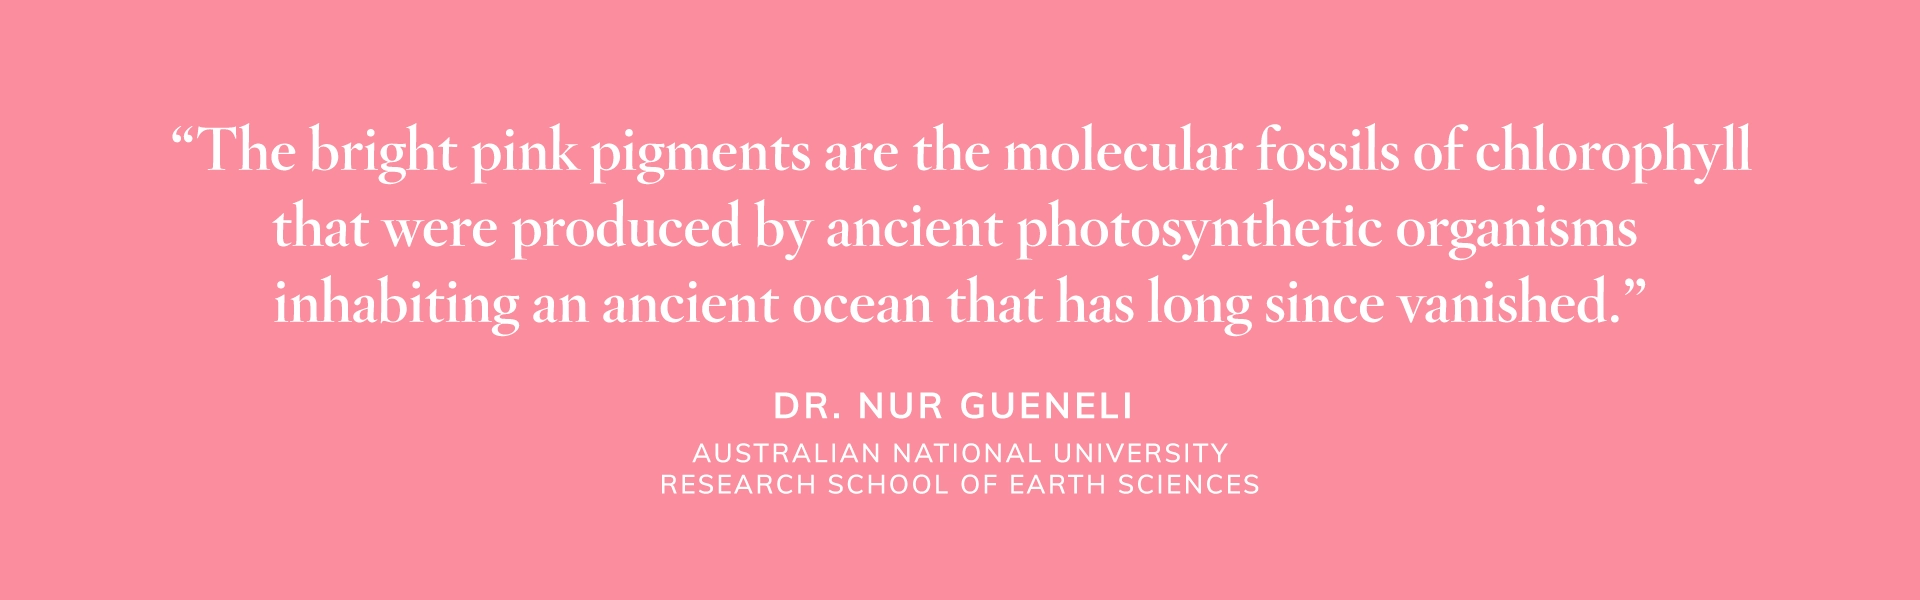 “The bright pink pigments are the molecular fossils of chlorophyll that were produced by ancient photosynthetic organisms inhabiting an ancient ocean that has long since vanished.” – Dr. Nur Gueneli from the Australian National University Research School of Earth Sciences